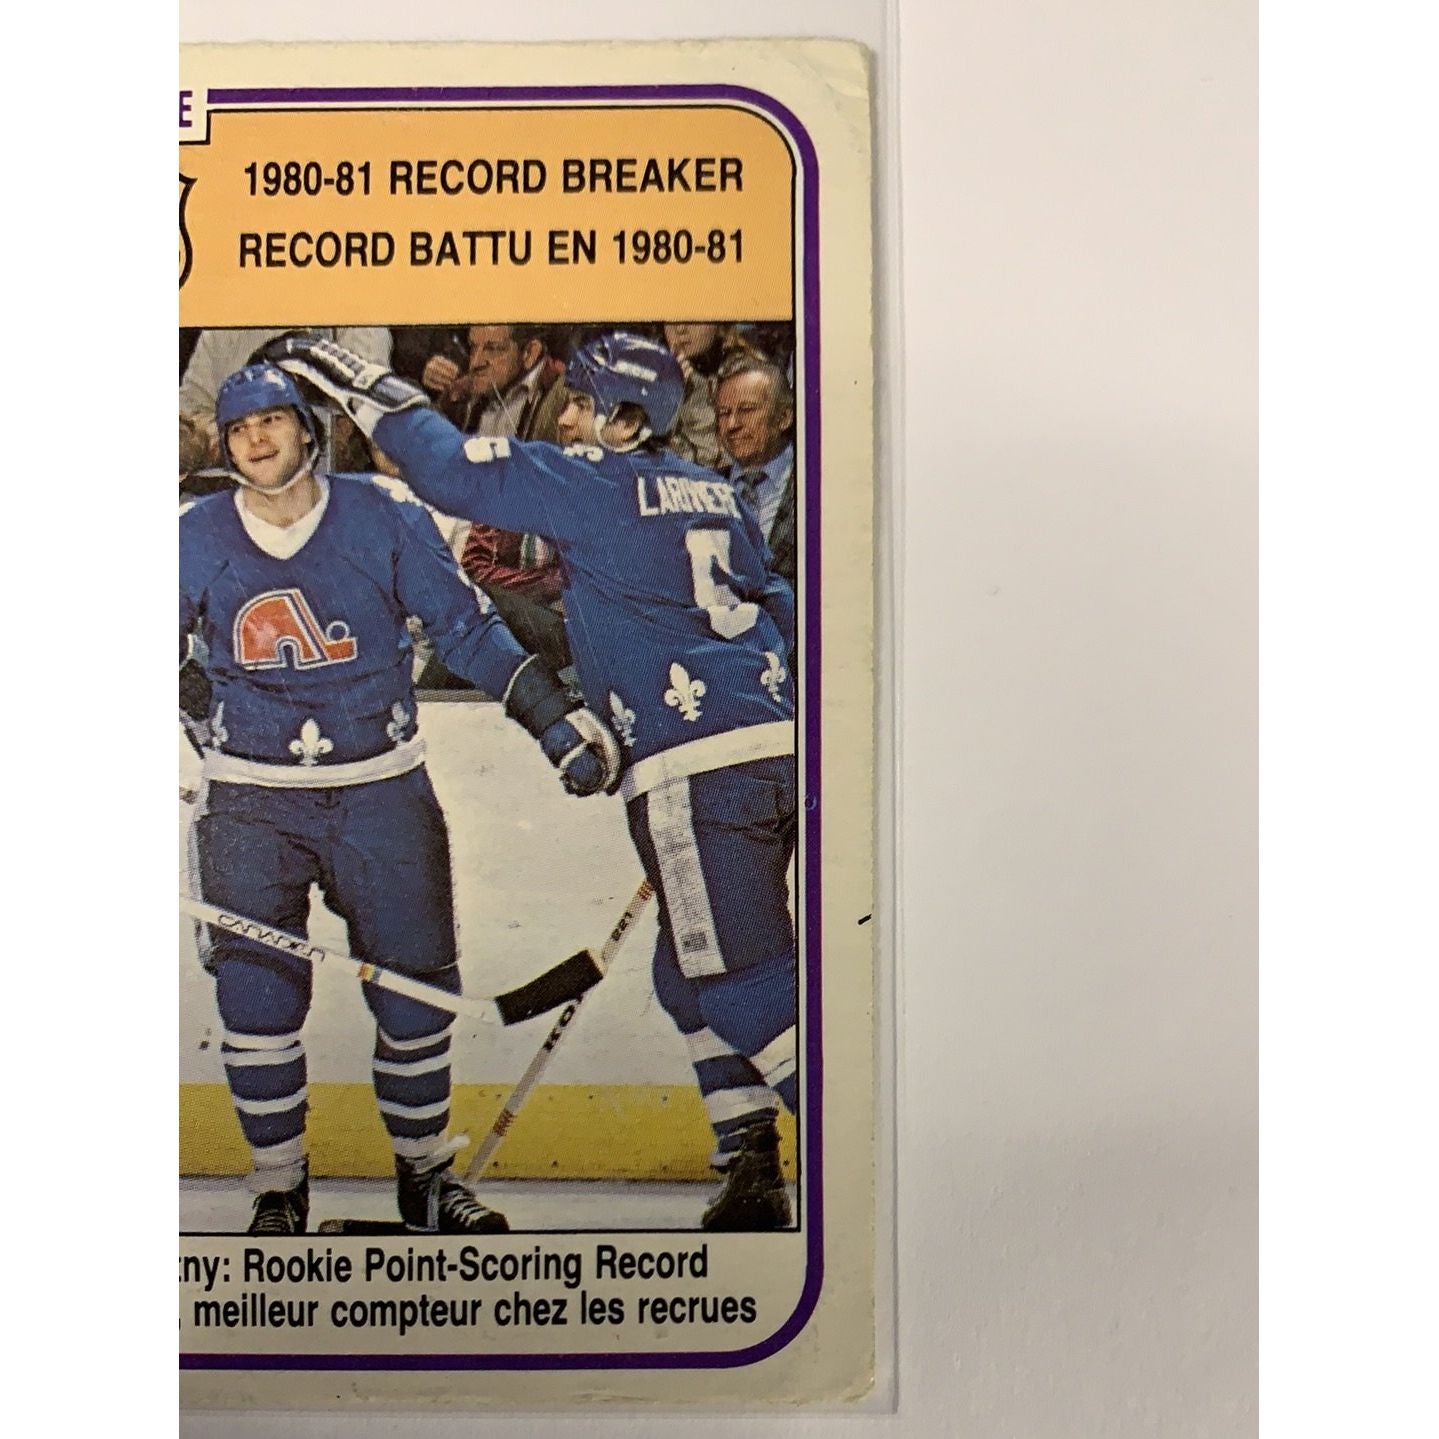  1981-82 O-Pee-Chee Peter Stastny Record Breakers  Local Legends Cards & Collectibles